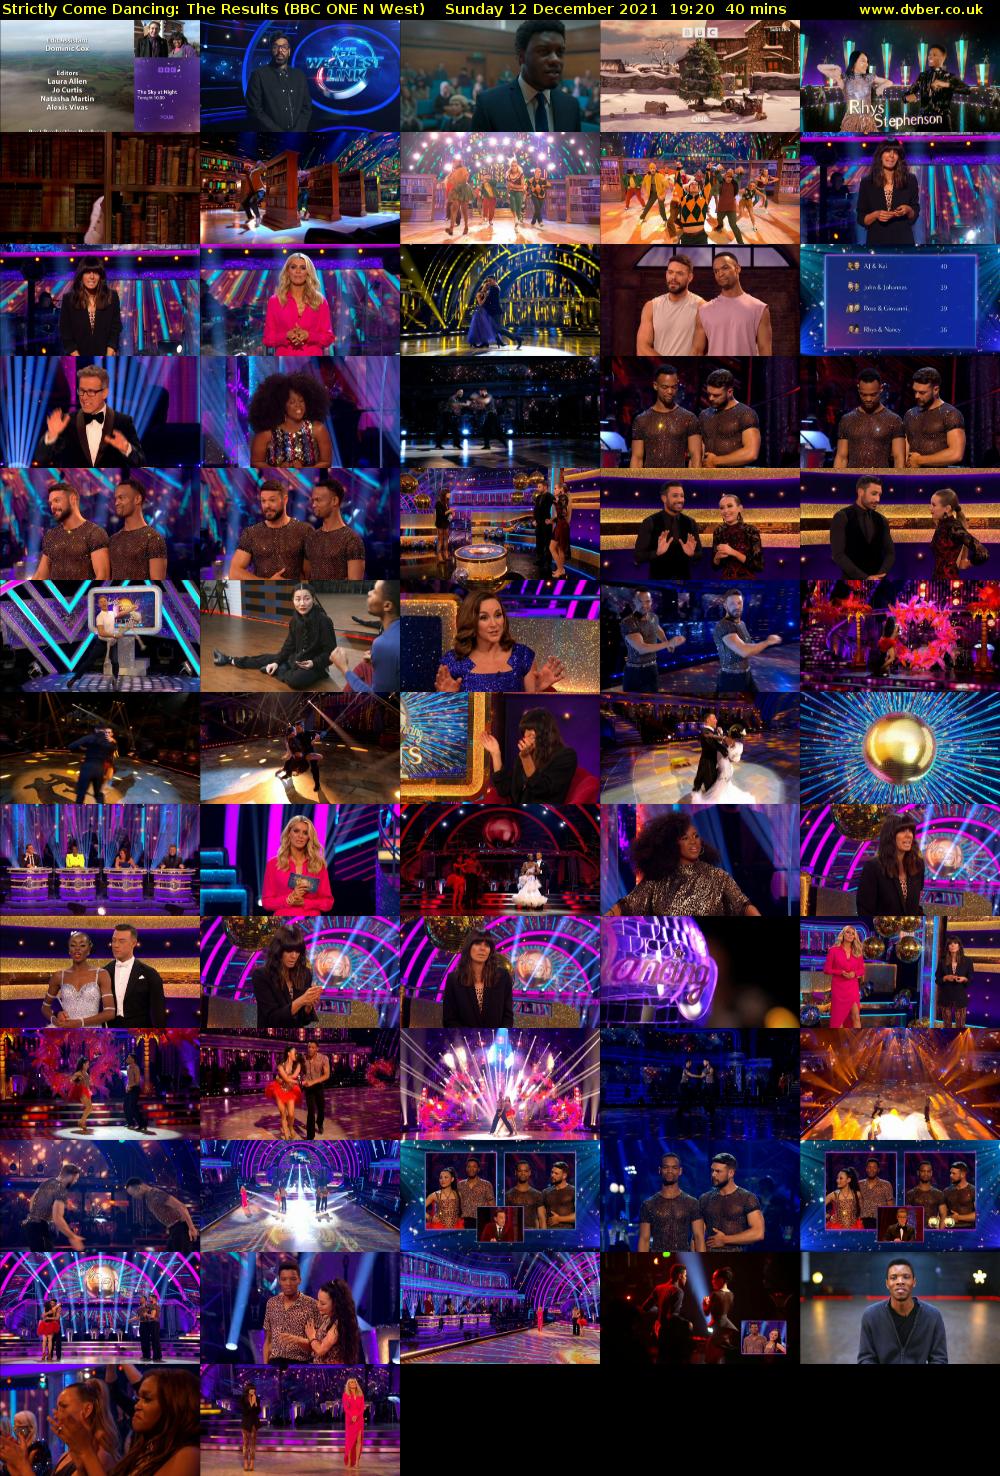 Strictly Come Dancing: The Results (BBC ONE N West) Sunday 12 December 2021 19:20 - 20:00